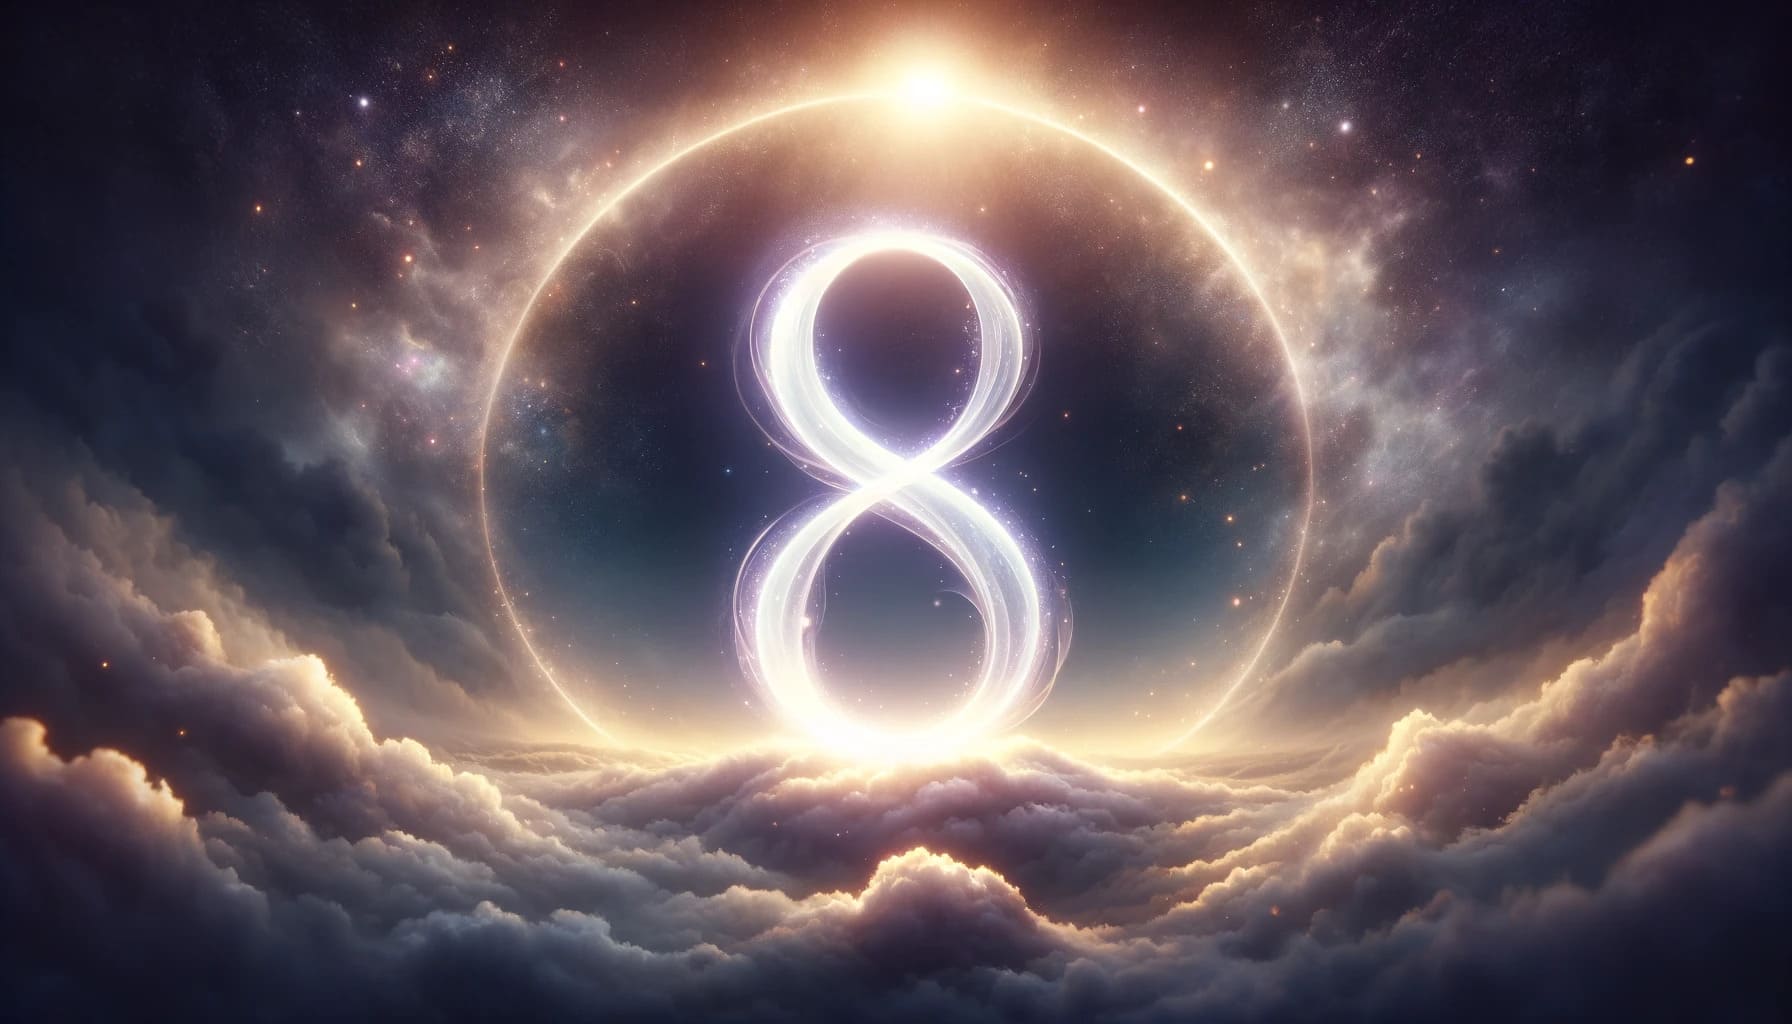 What does the number 8 mean spiritually